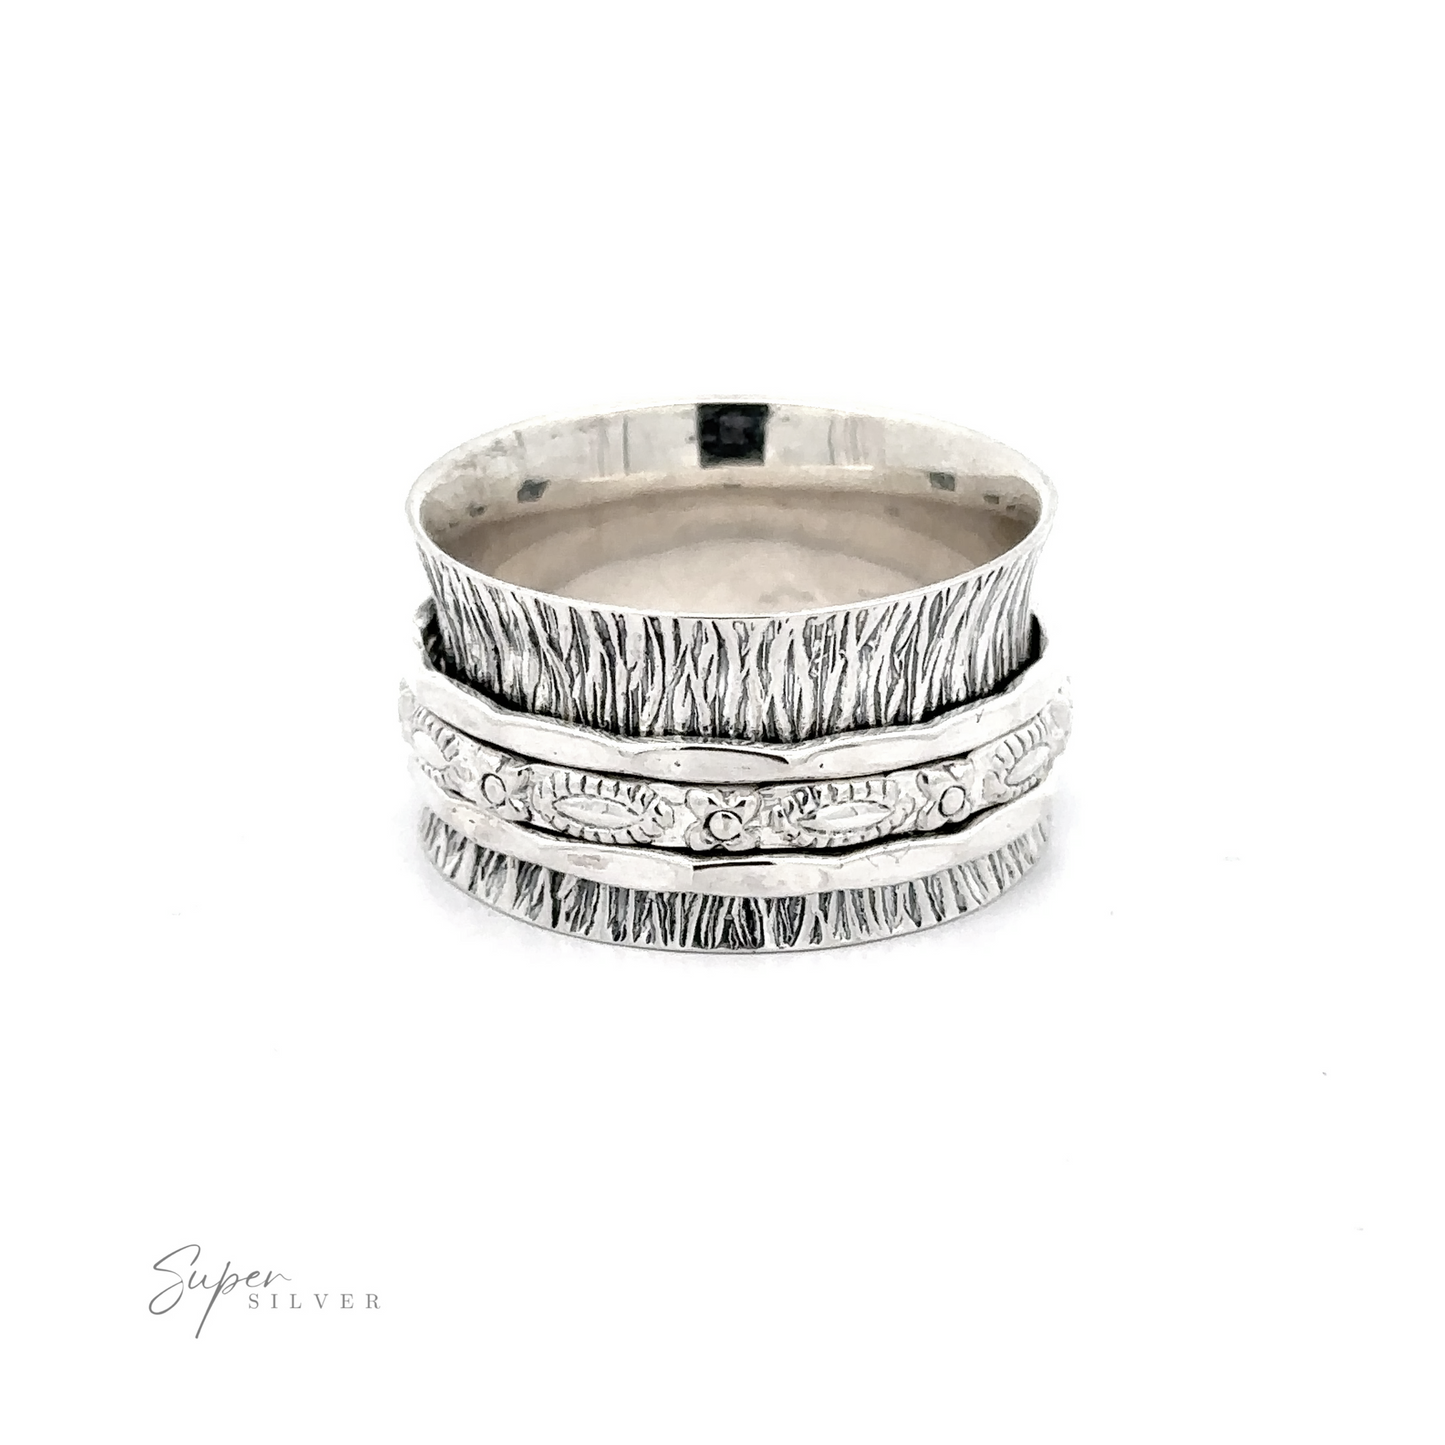 A Tree Bark Spinner ring with diamonds on it.